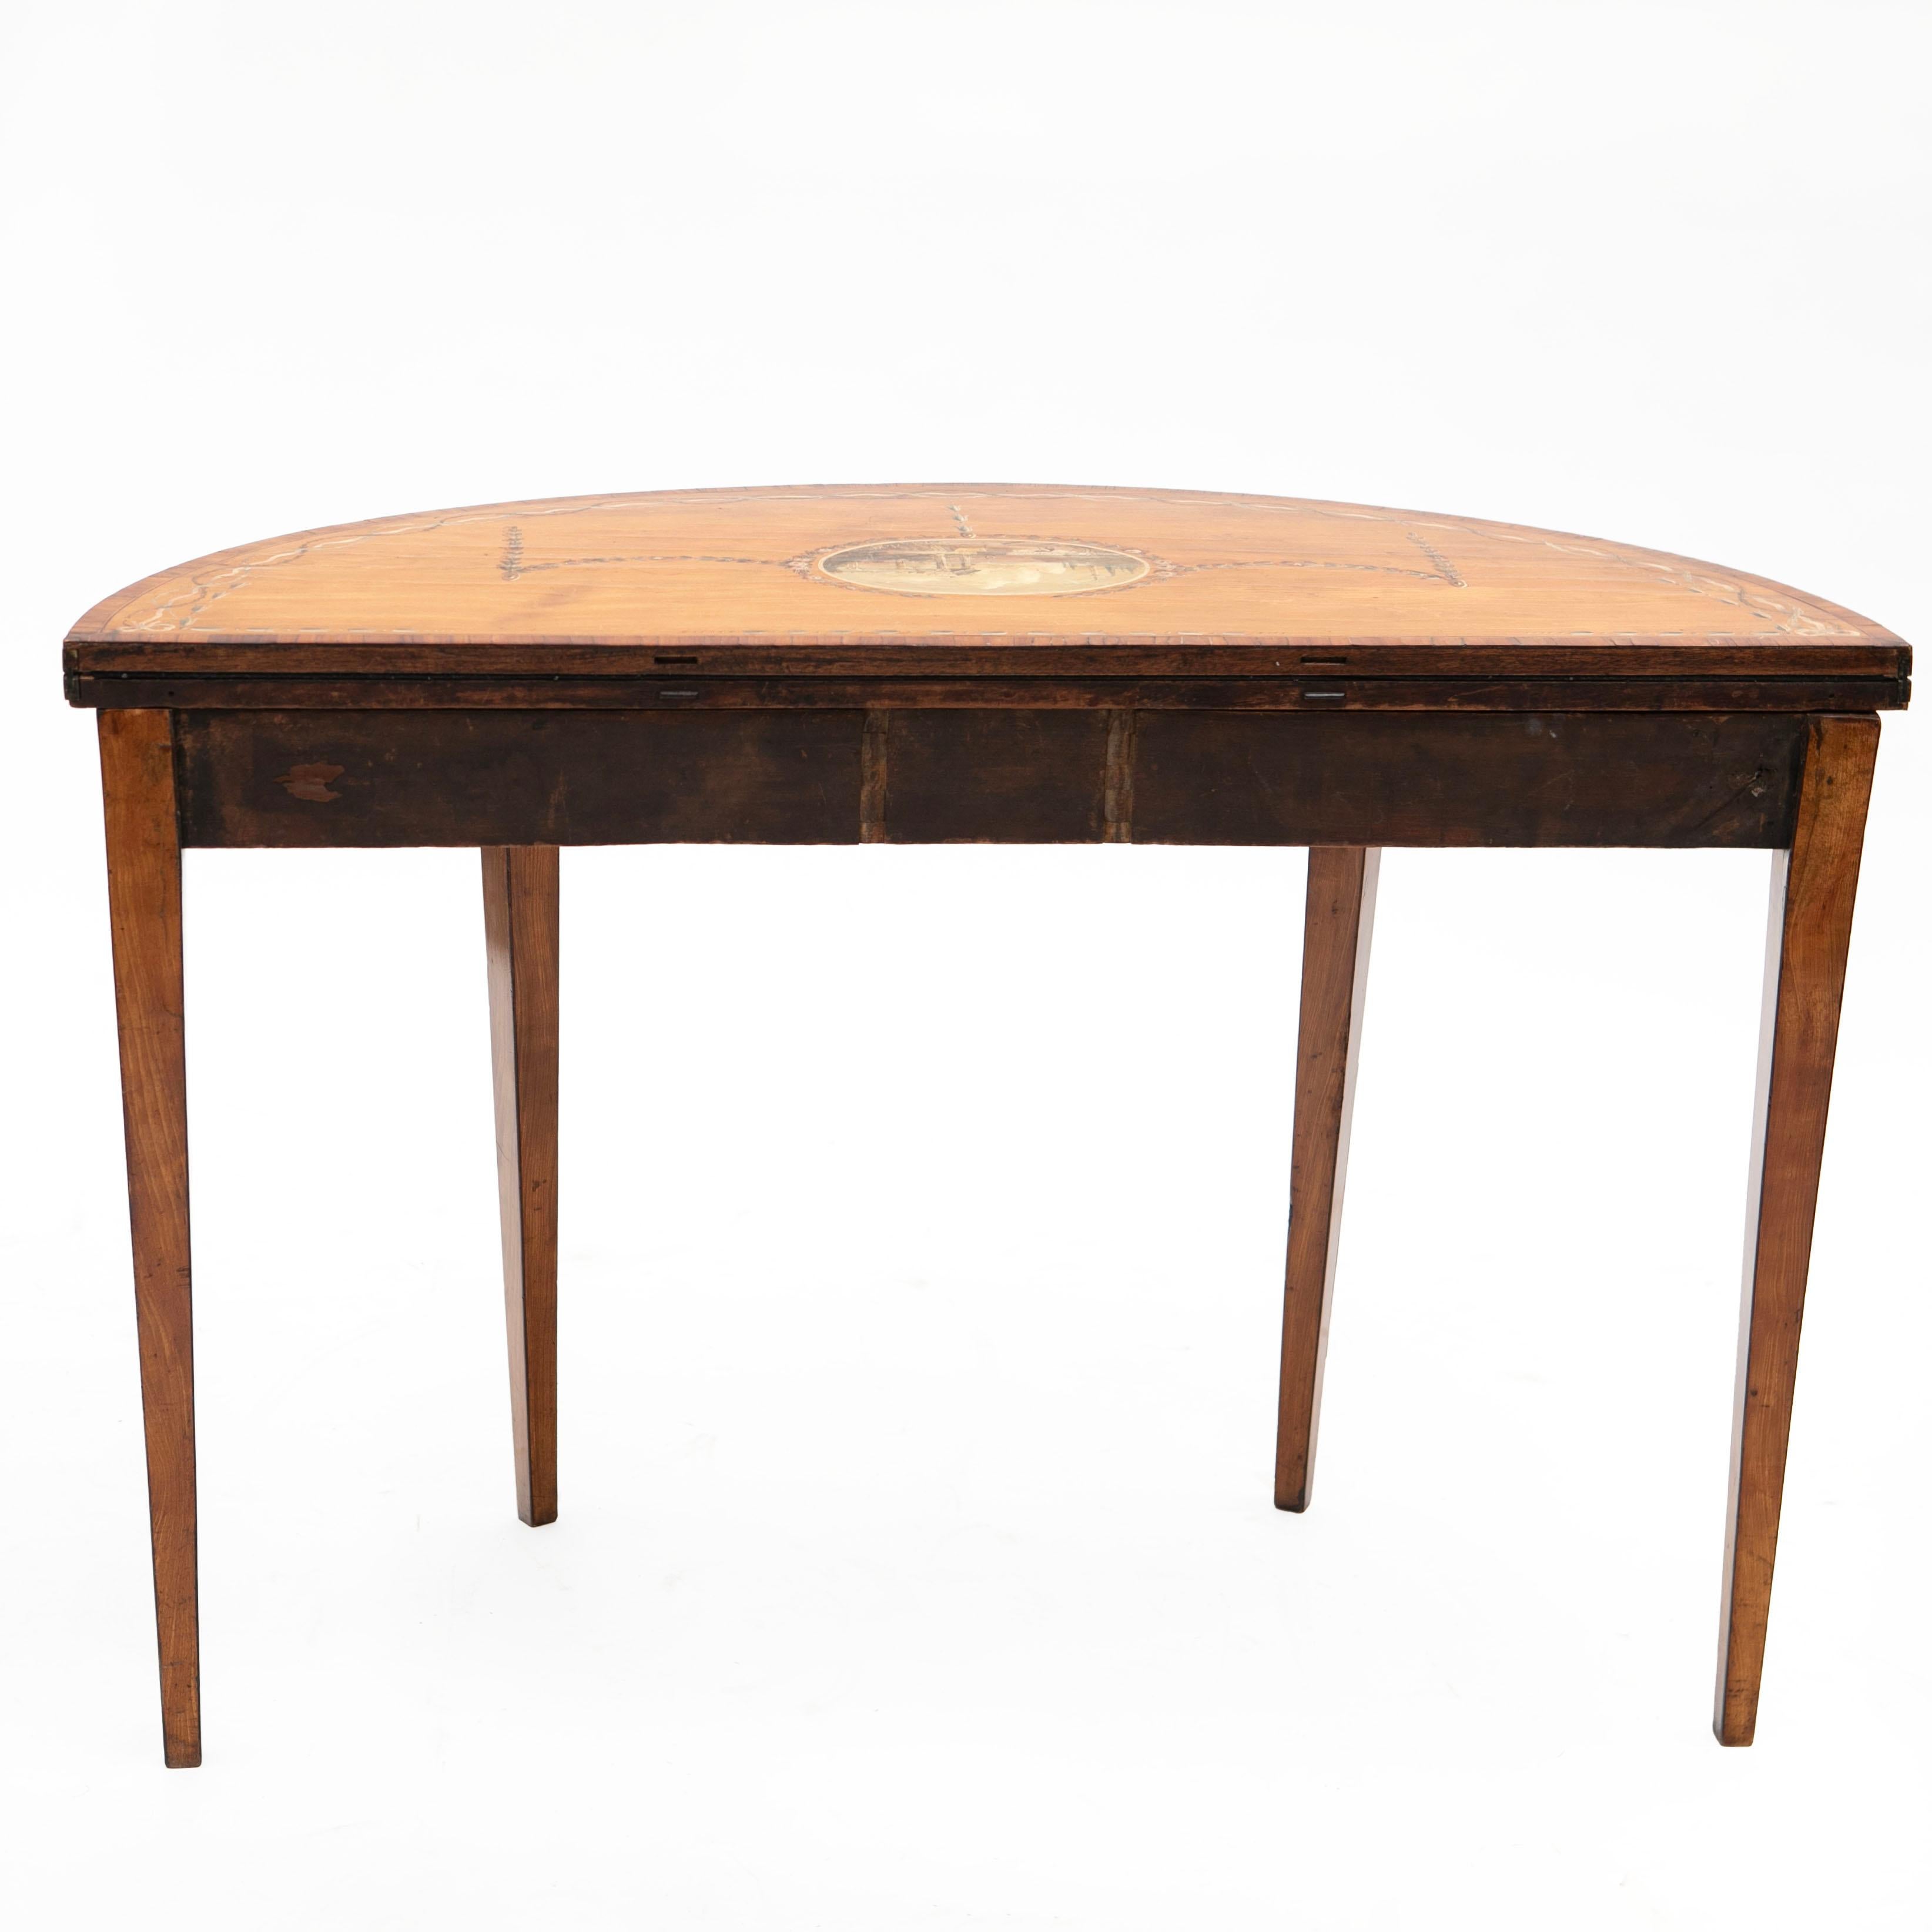 Early 19th Century Sheraton Inlaid & Hand Painted Demilune Card Table For Sale 2